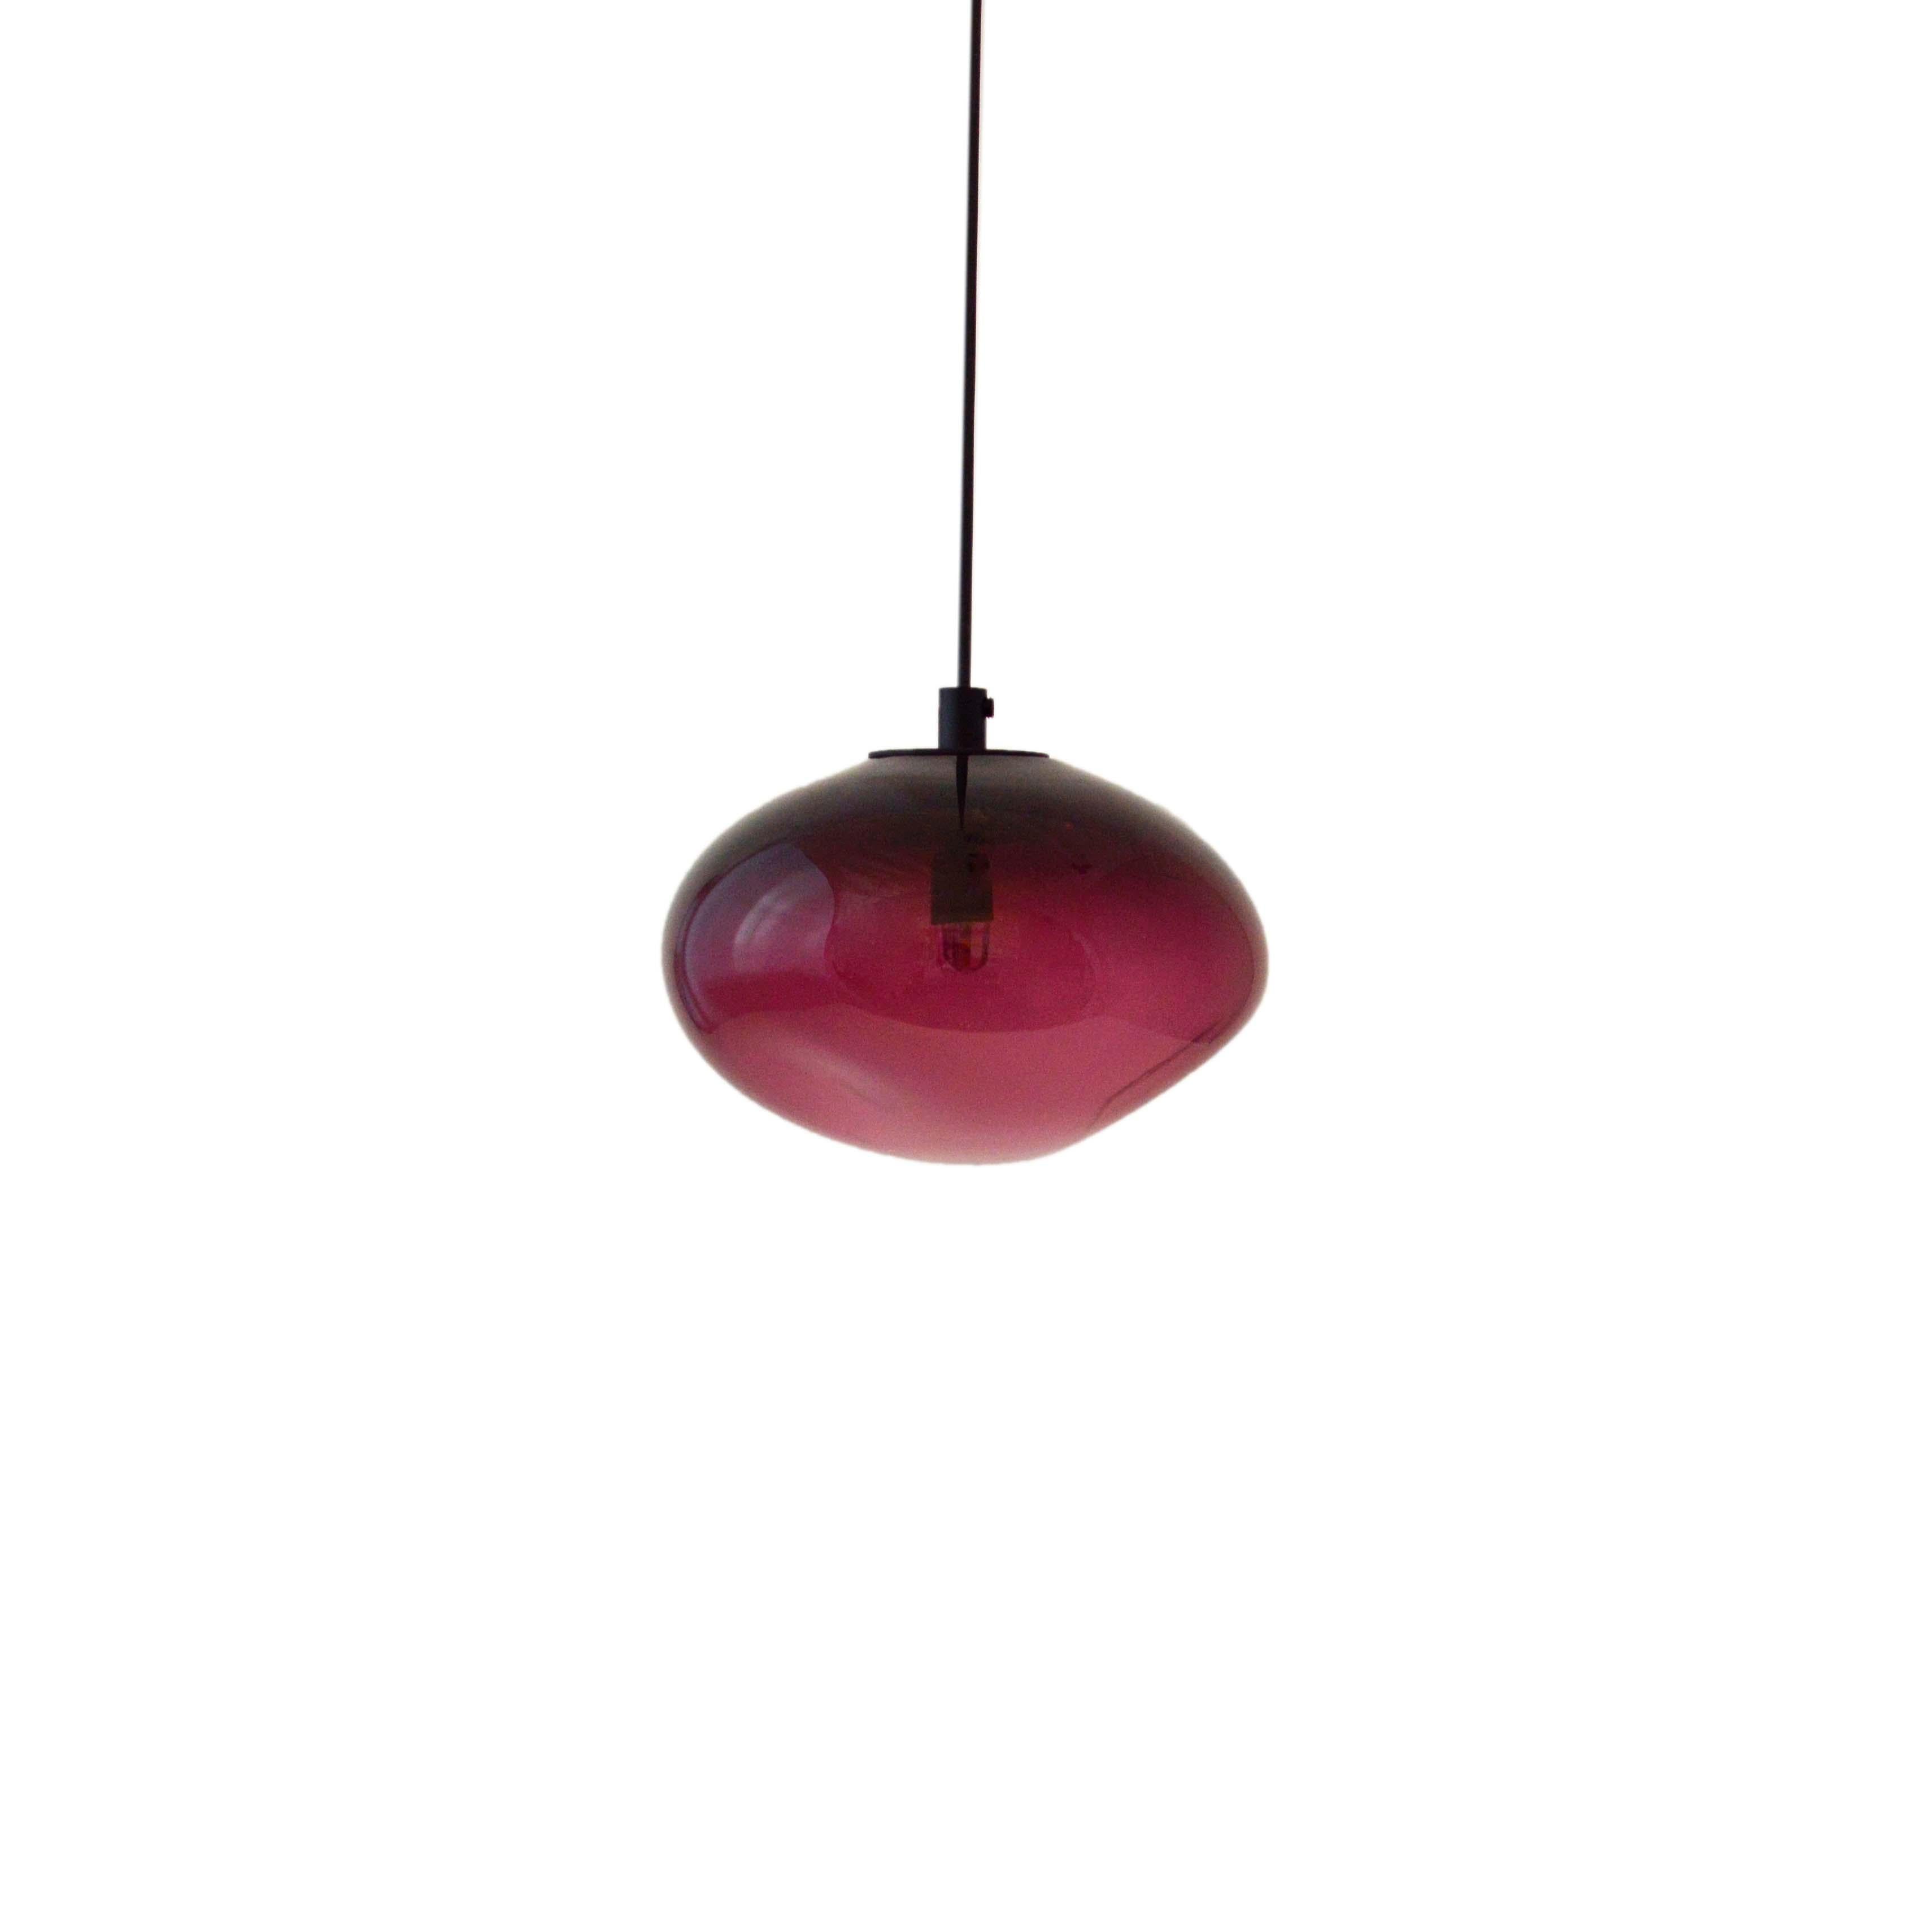 Starglow red Pendant by ELOA.
No UL listed 
Material: glass, steel, silver.
Dimensions: D 15 x W 13 x H 100 cm.
Also available in different colours and dimensions.

All our lamps can be wired according to each country. If sold to the USA it will be